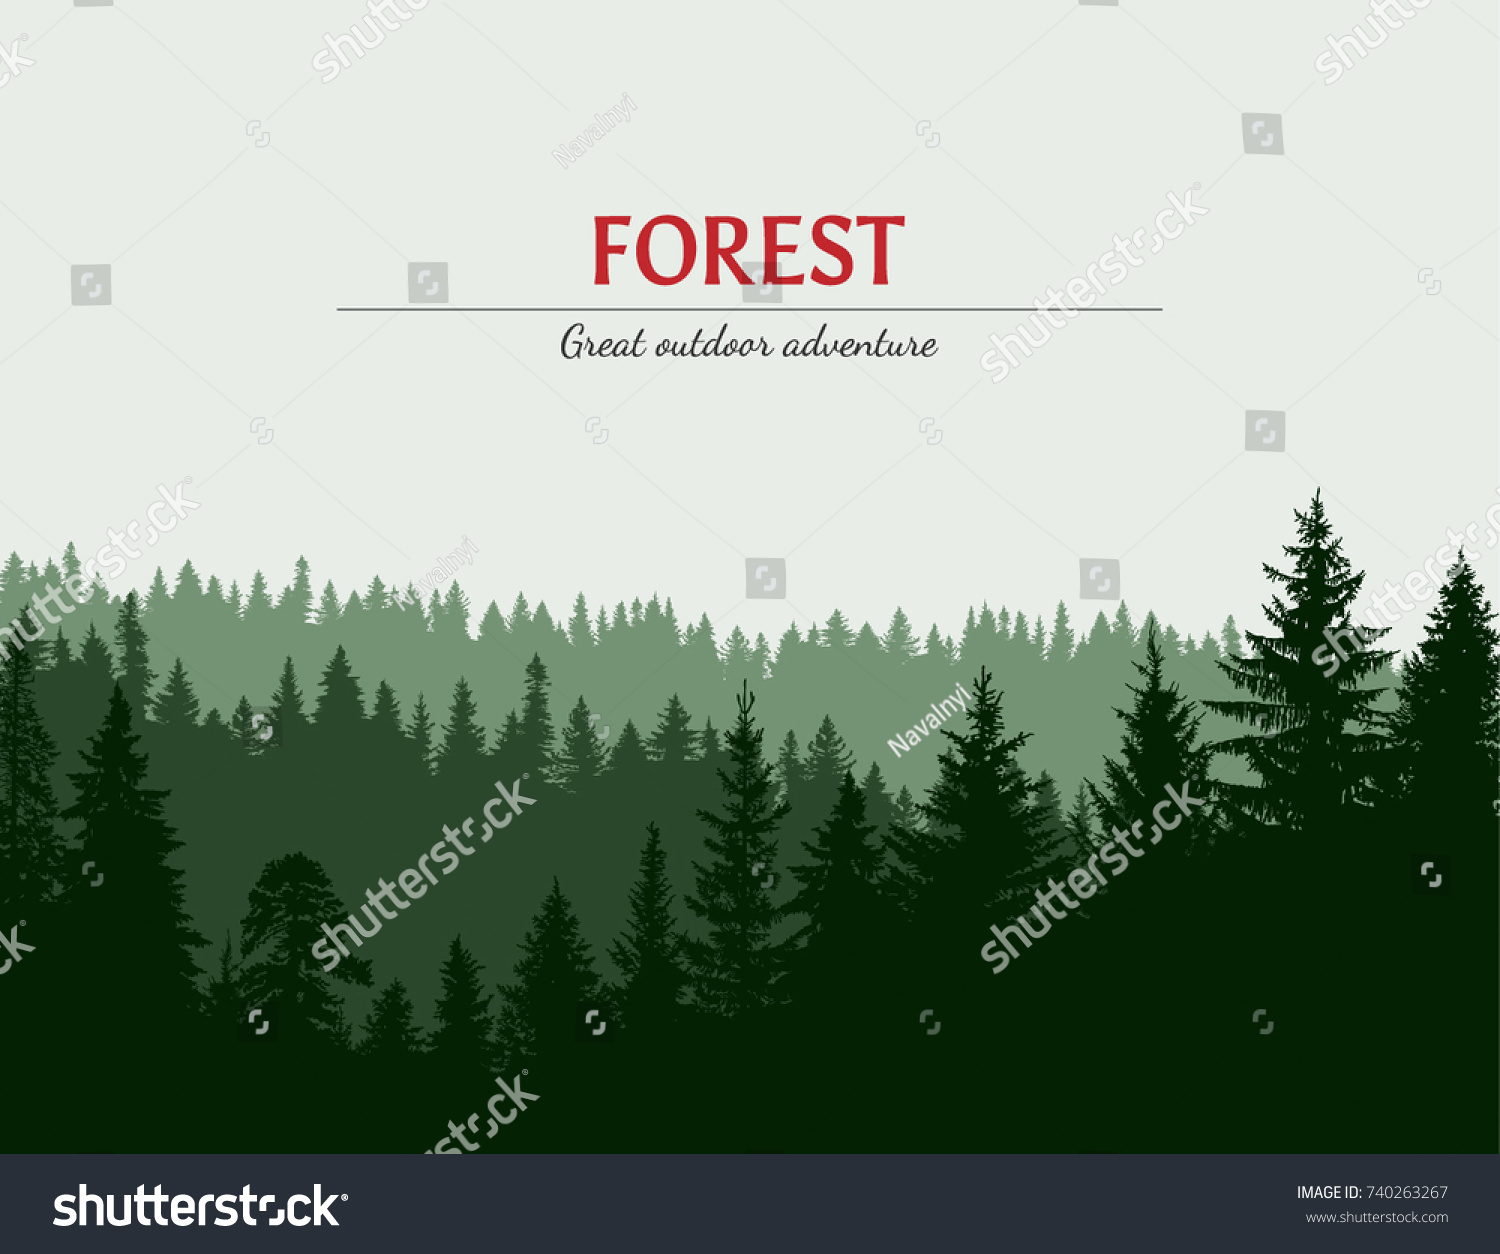 Abstract background. Forest wilderness landscape. Template for your design works. Hand drawn vector illustration. #740263267